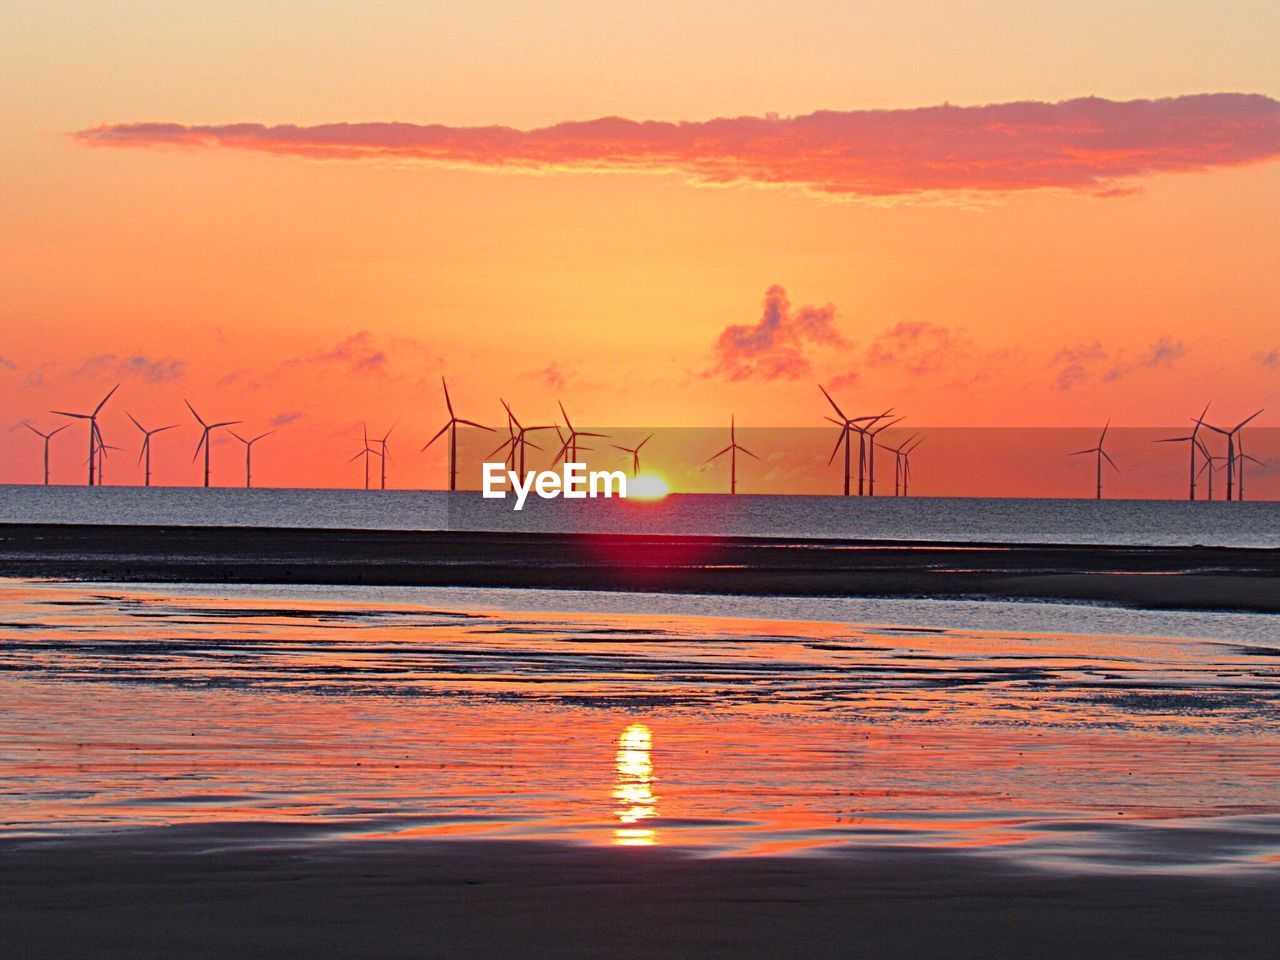 VIEW OF WINDMILL ON SEA AT SUNSET